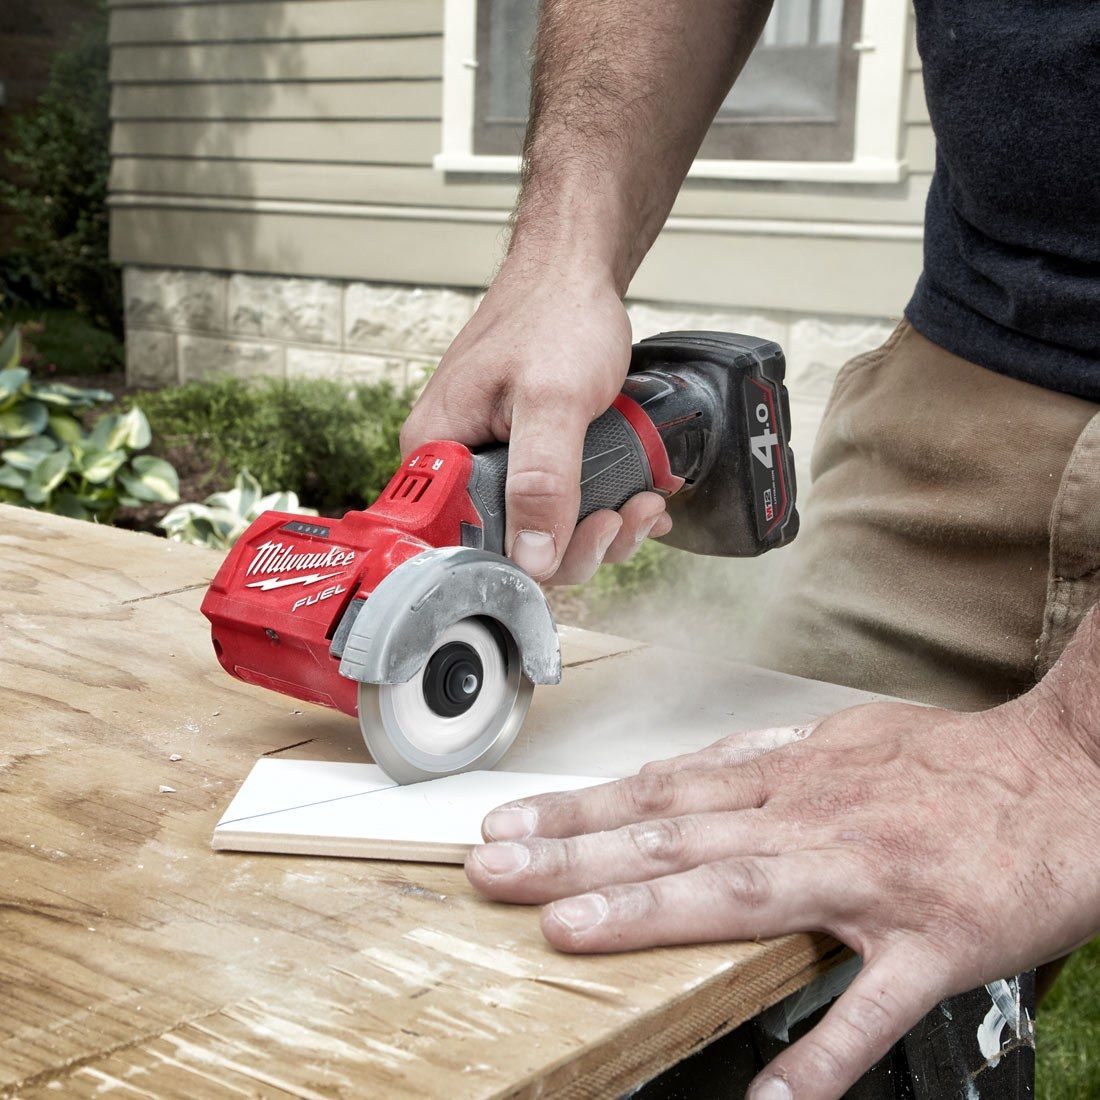 MILWAUKEE M12 FUEL FCOT-0 12V 76MM BRUSHLESS MULTI MATERIAL CUT OFF TOOL ANGLE GRINDER BODY ONLY